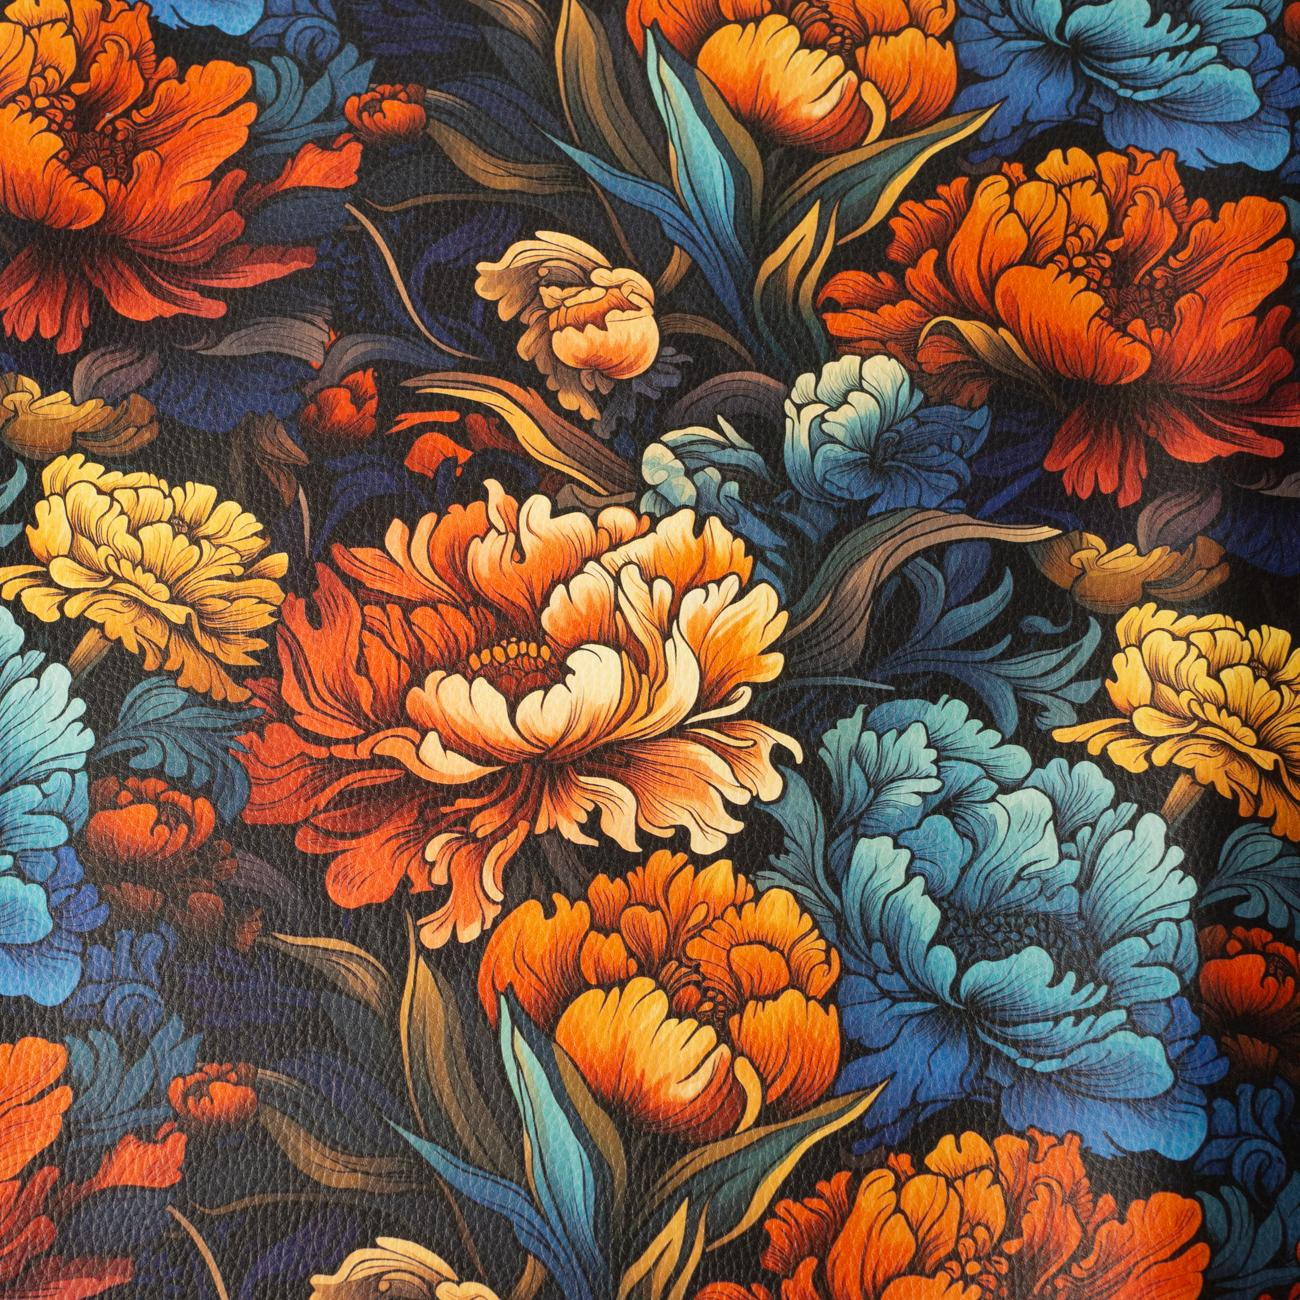 VINTAGE CHINESE FLOWERS PAT. 1 (46 cm x 50 cm) - thick pressed leatherette